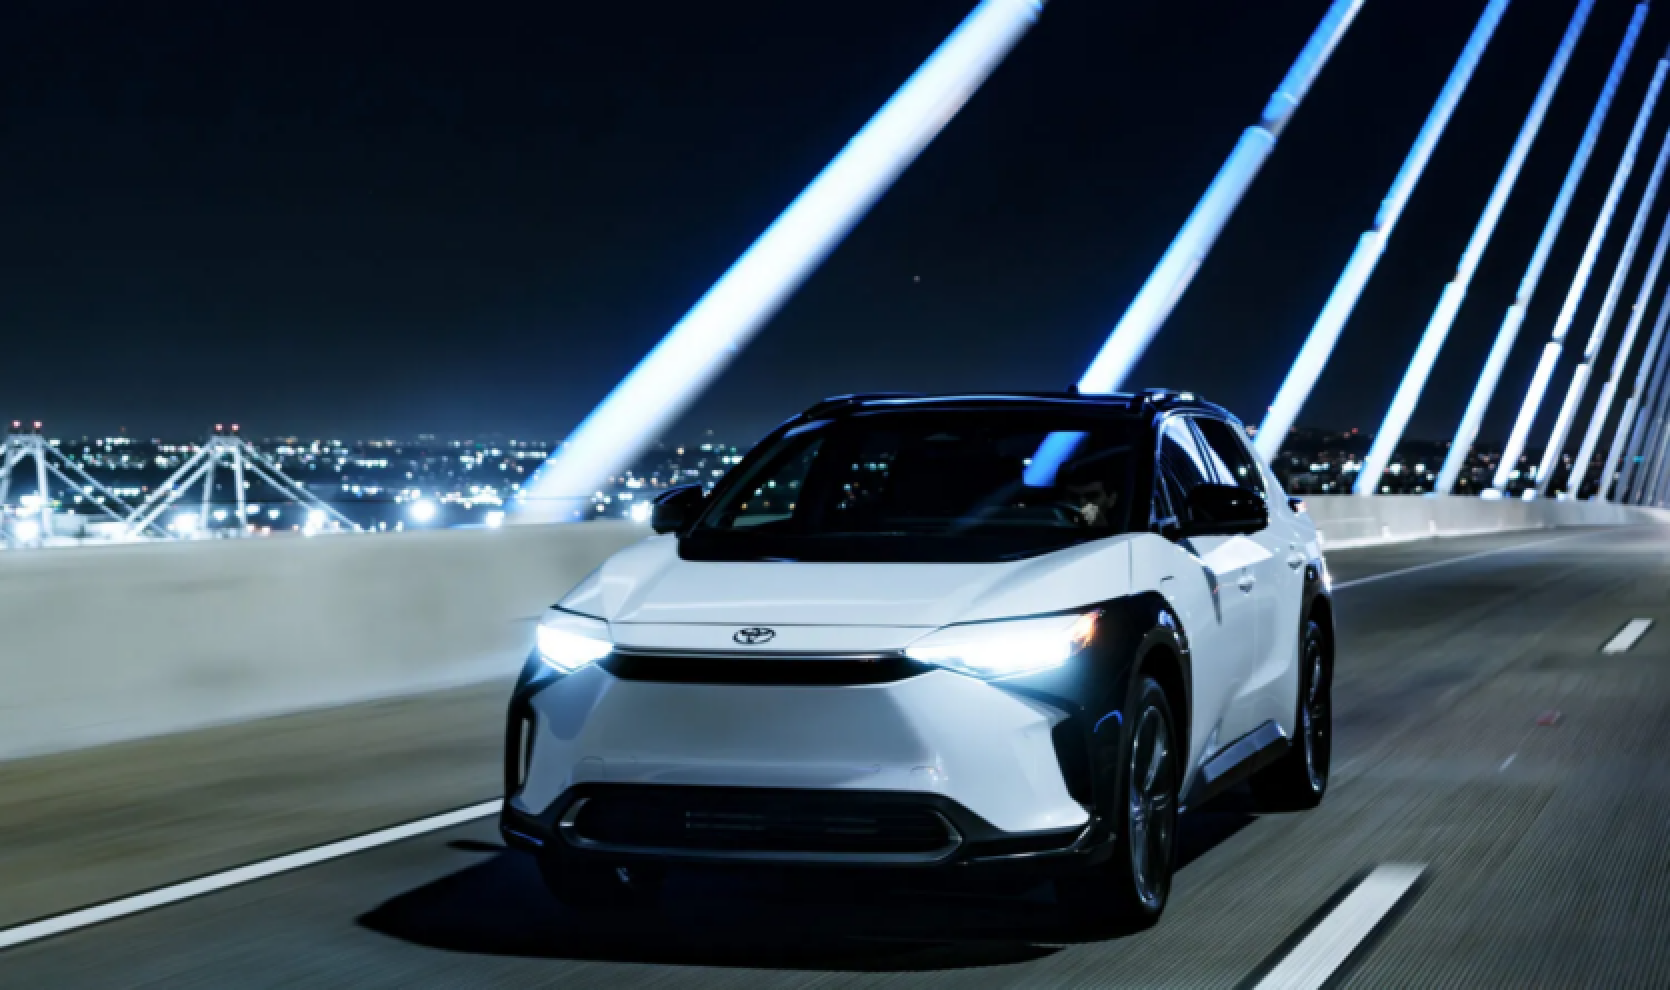 Toyota says it will continue to buy credits so it doesn't "waste" money on electric cars